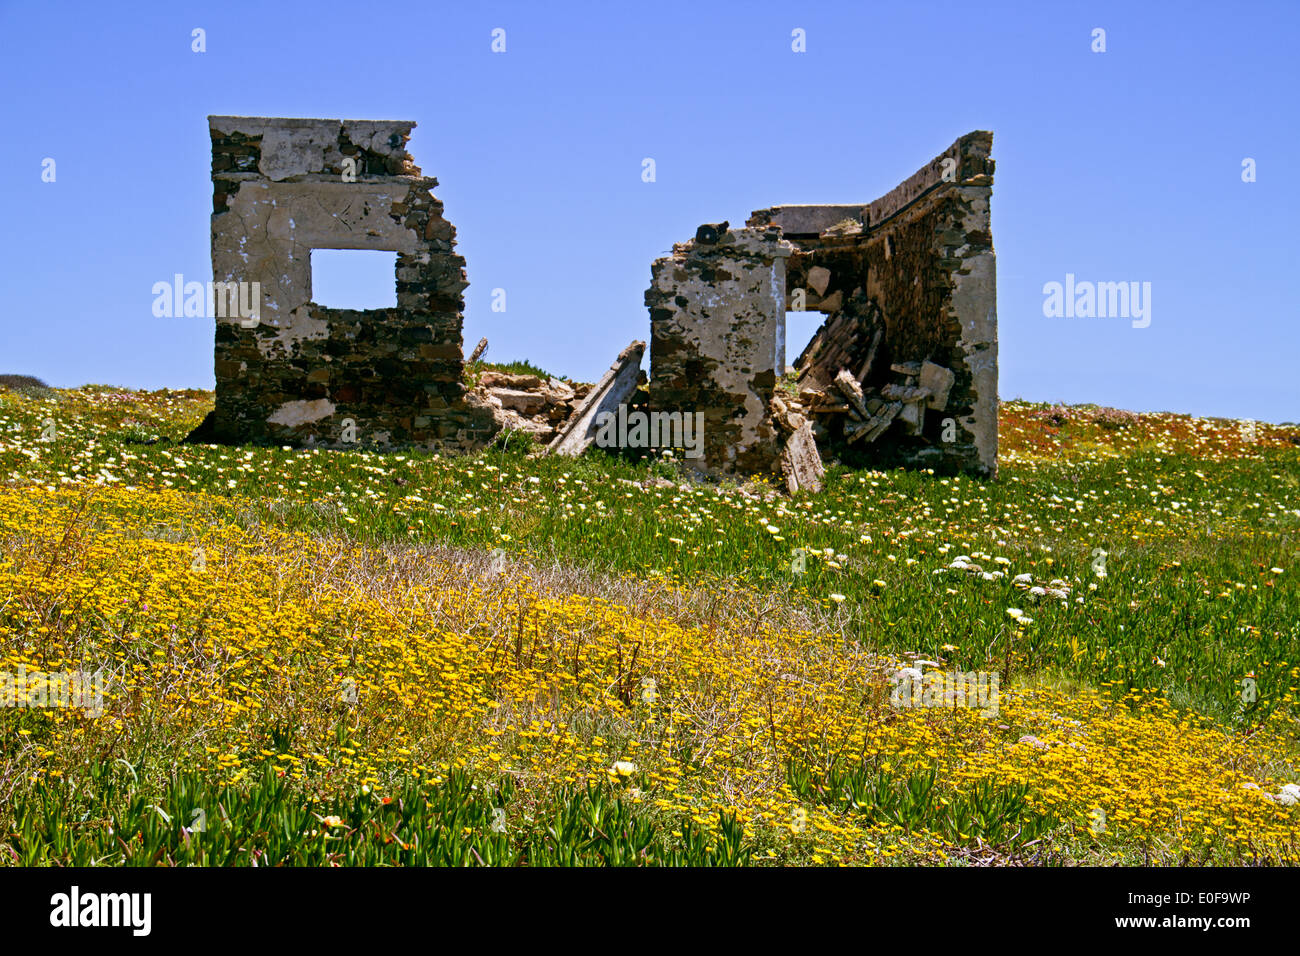 Ruin of a building in a meadow with flowers near Pedra da Atalaia in the Algarve, Portugal Stock Photo